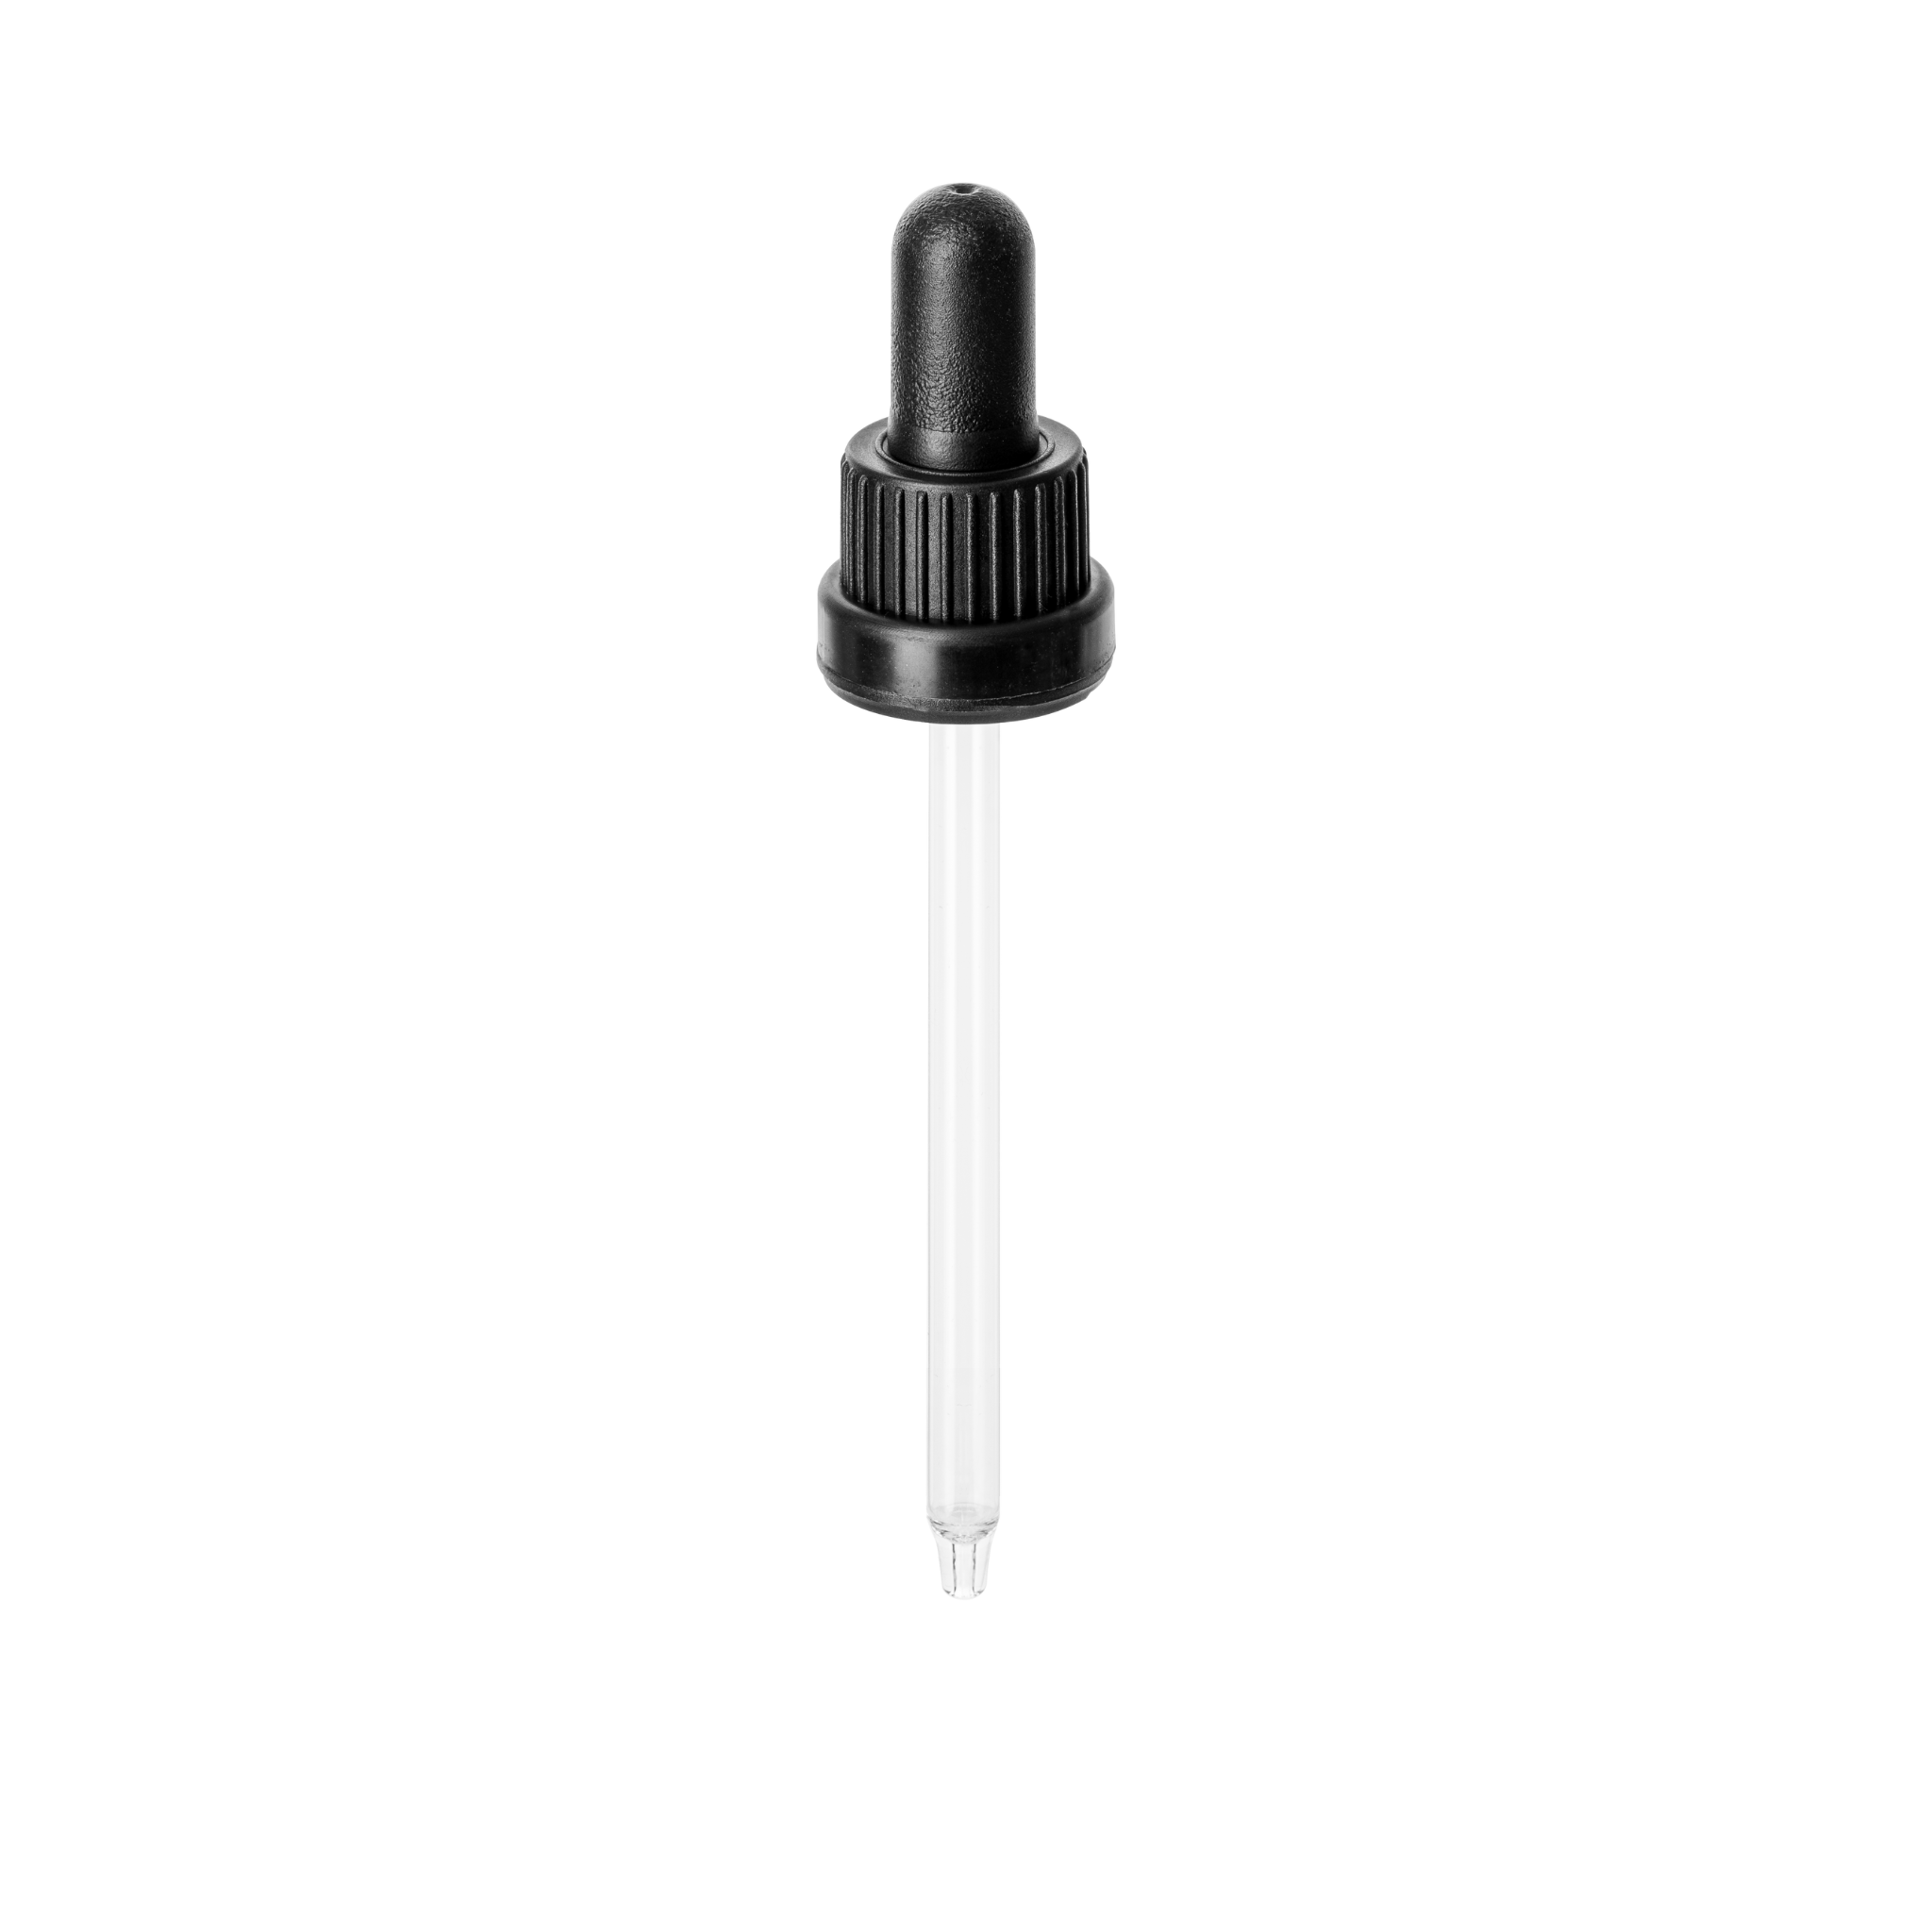 Pipette tamper evident DIN18, III, black, ribbed, bulb NBR, dose 1.0ml, conical tip (Orion 50)